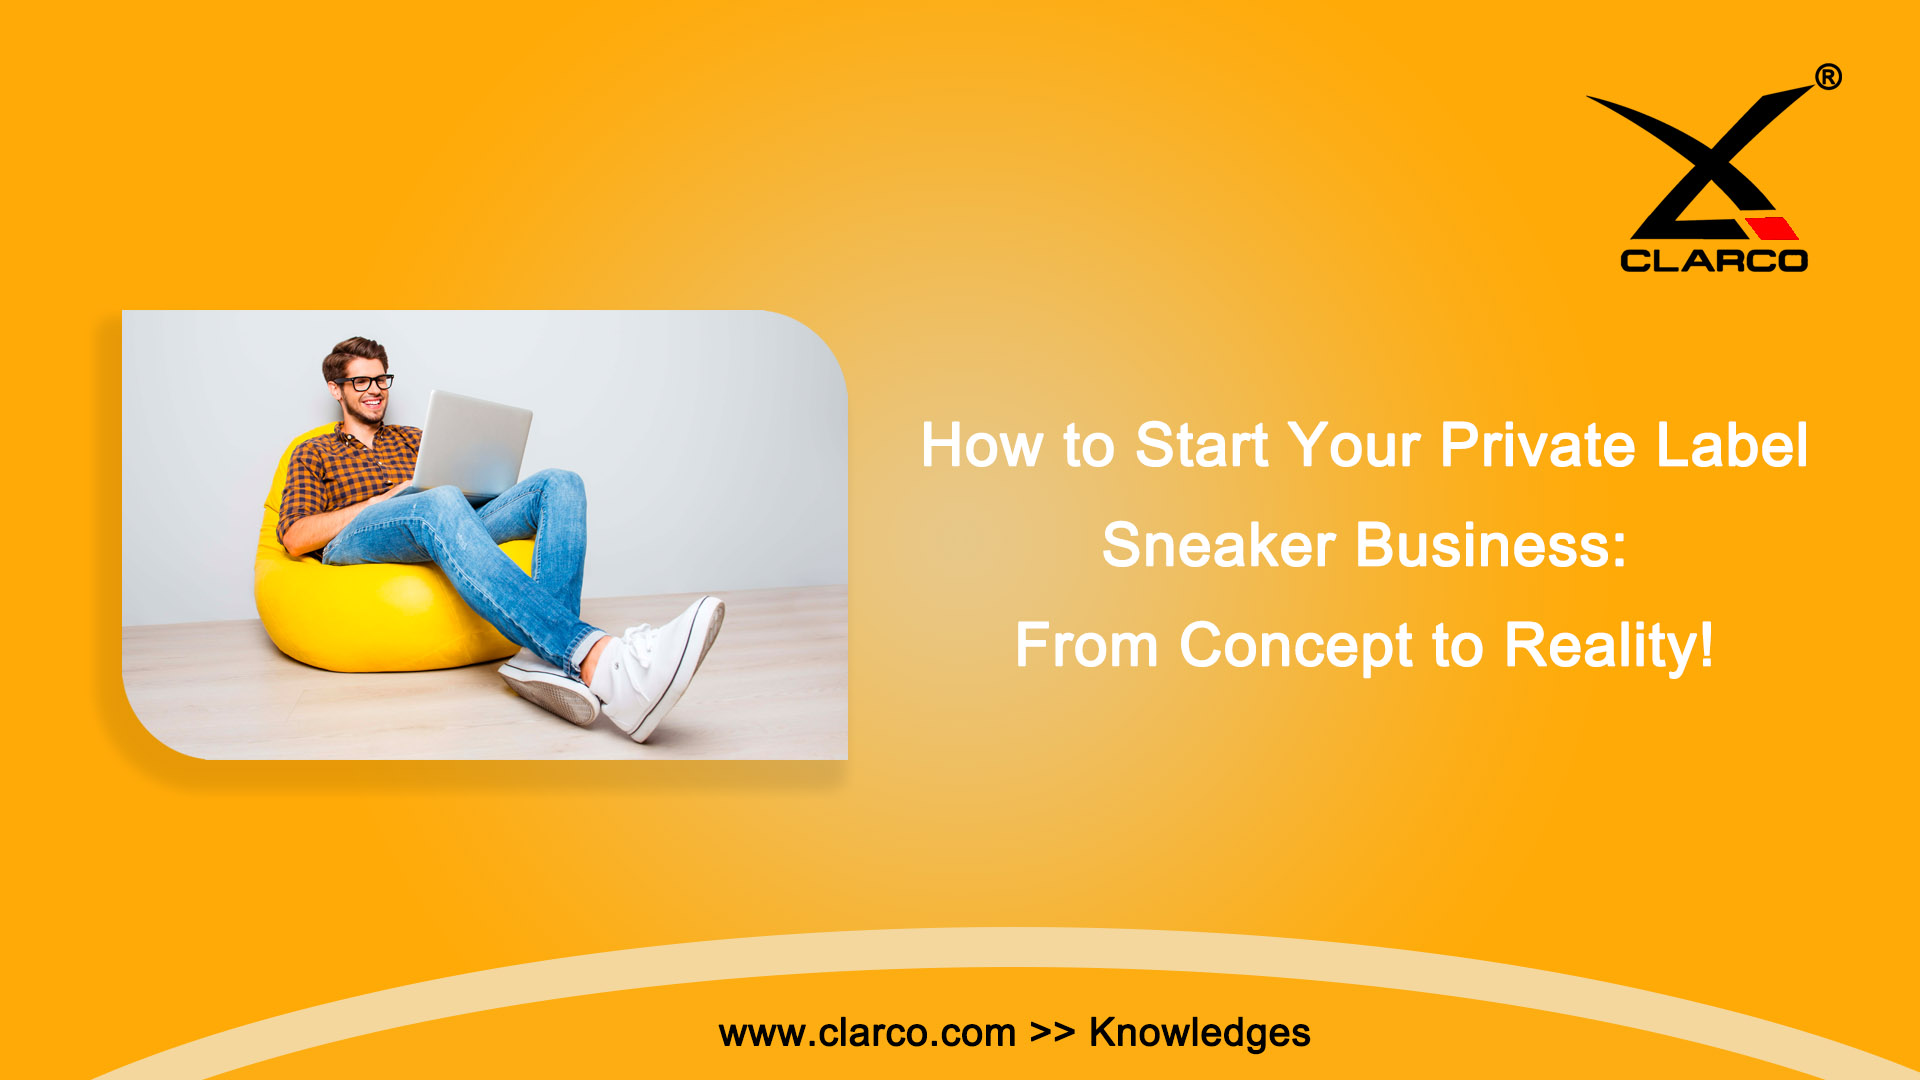 How to Start Your Private Label Sneaker Business